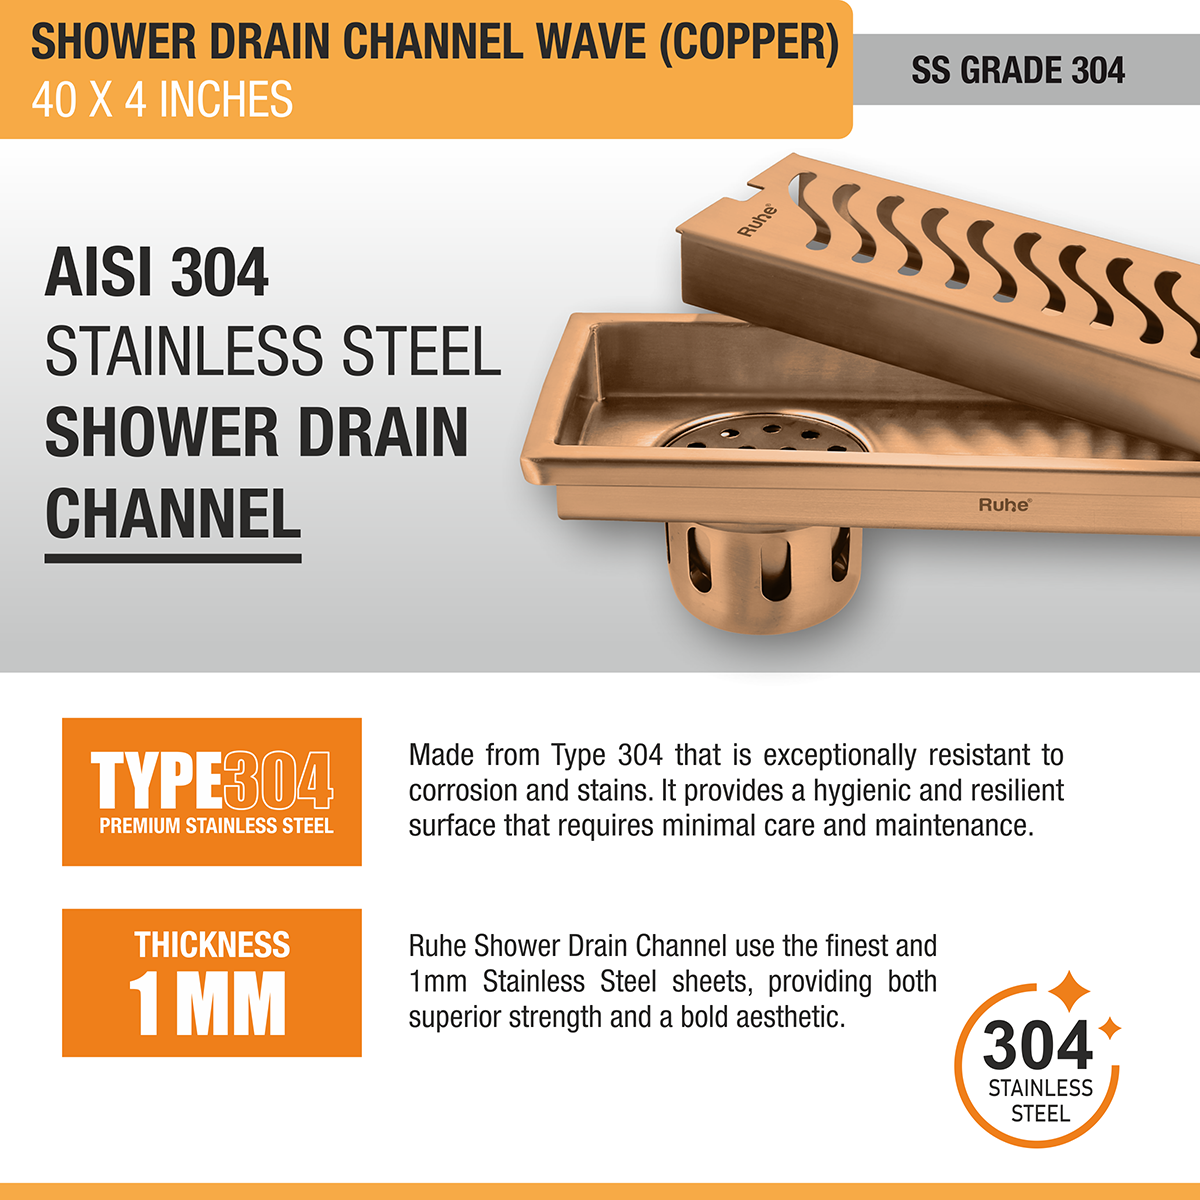 Wave Shower Drain Channel (40 x 4 Inches) ROSE GOLD/ANTIQUE COPPER stainless steel